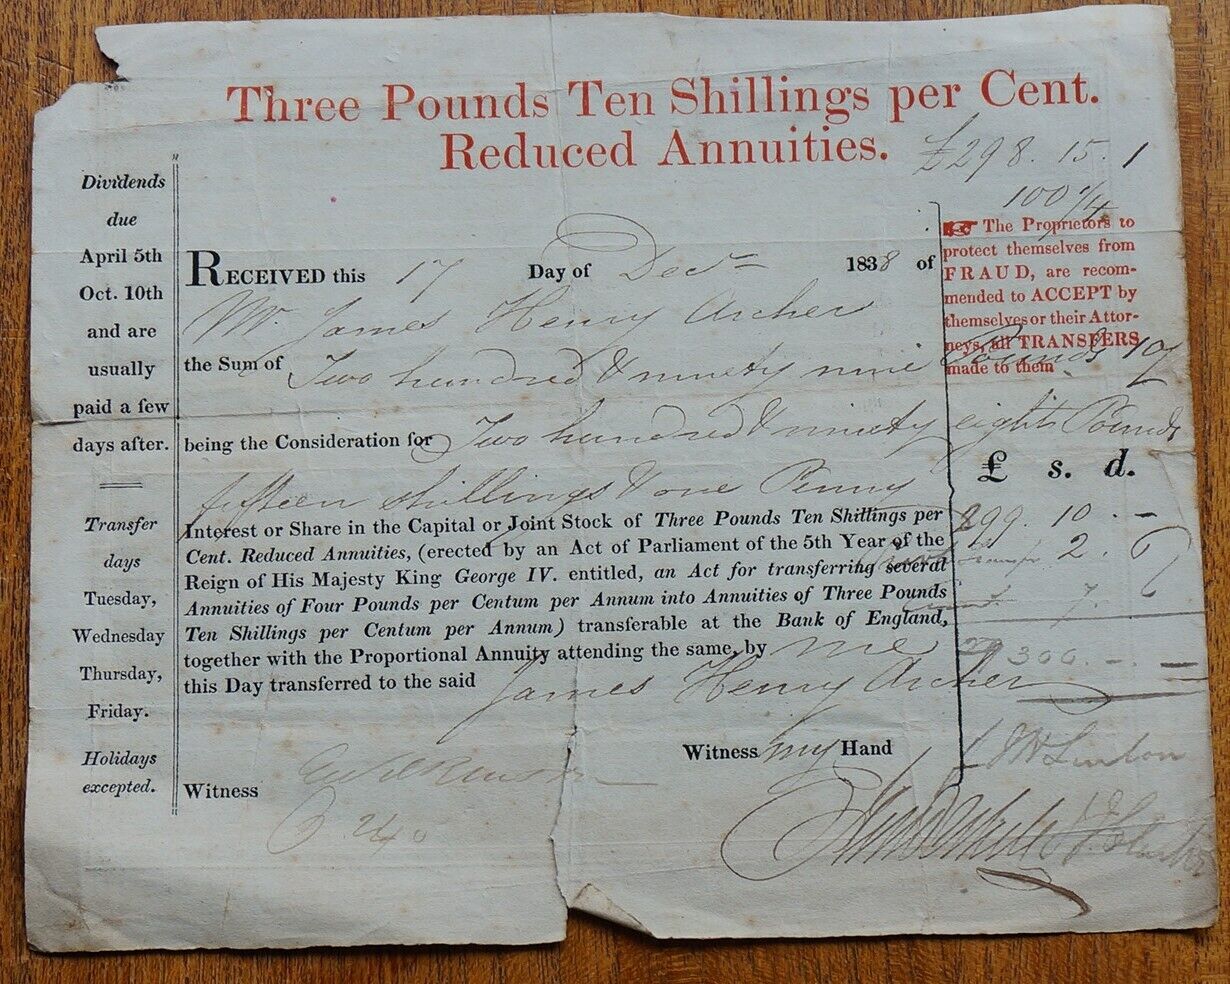 Three Pounds Ten Shillings per Cent Reduced Annuities dated 1838 for £298